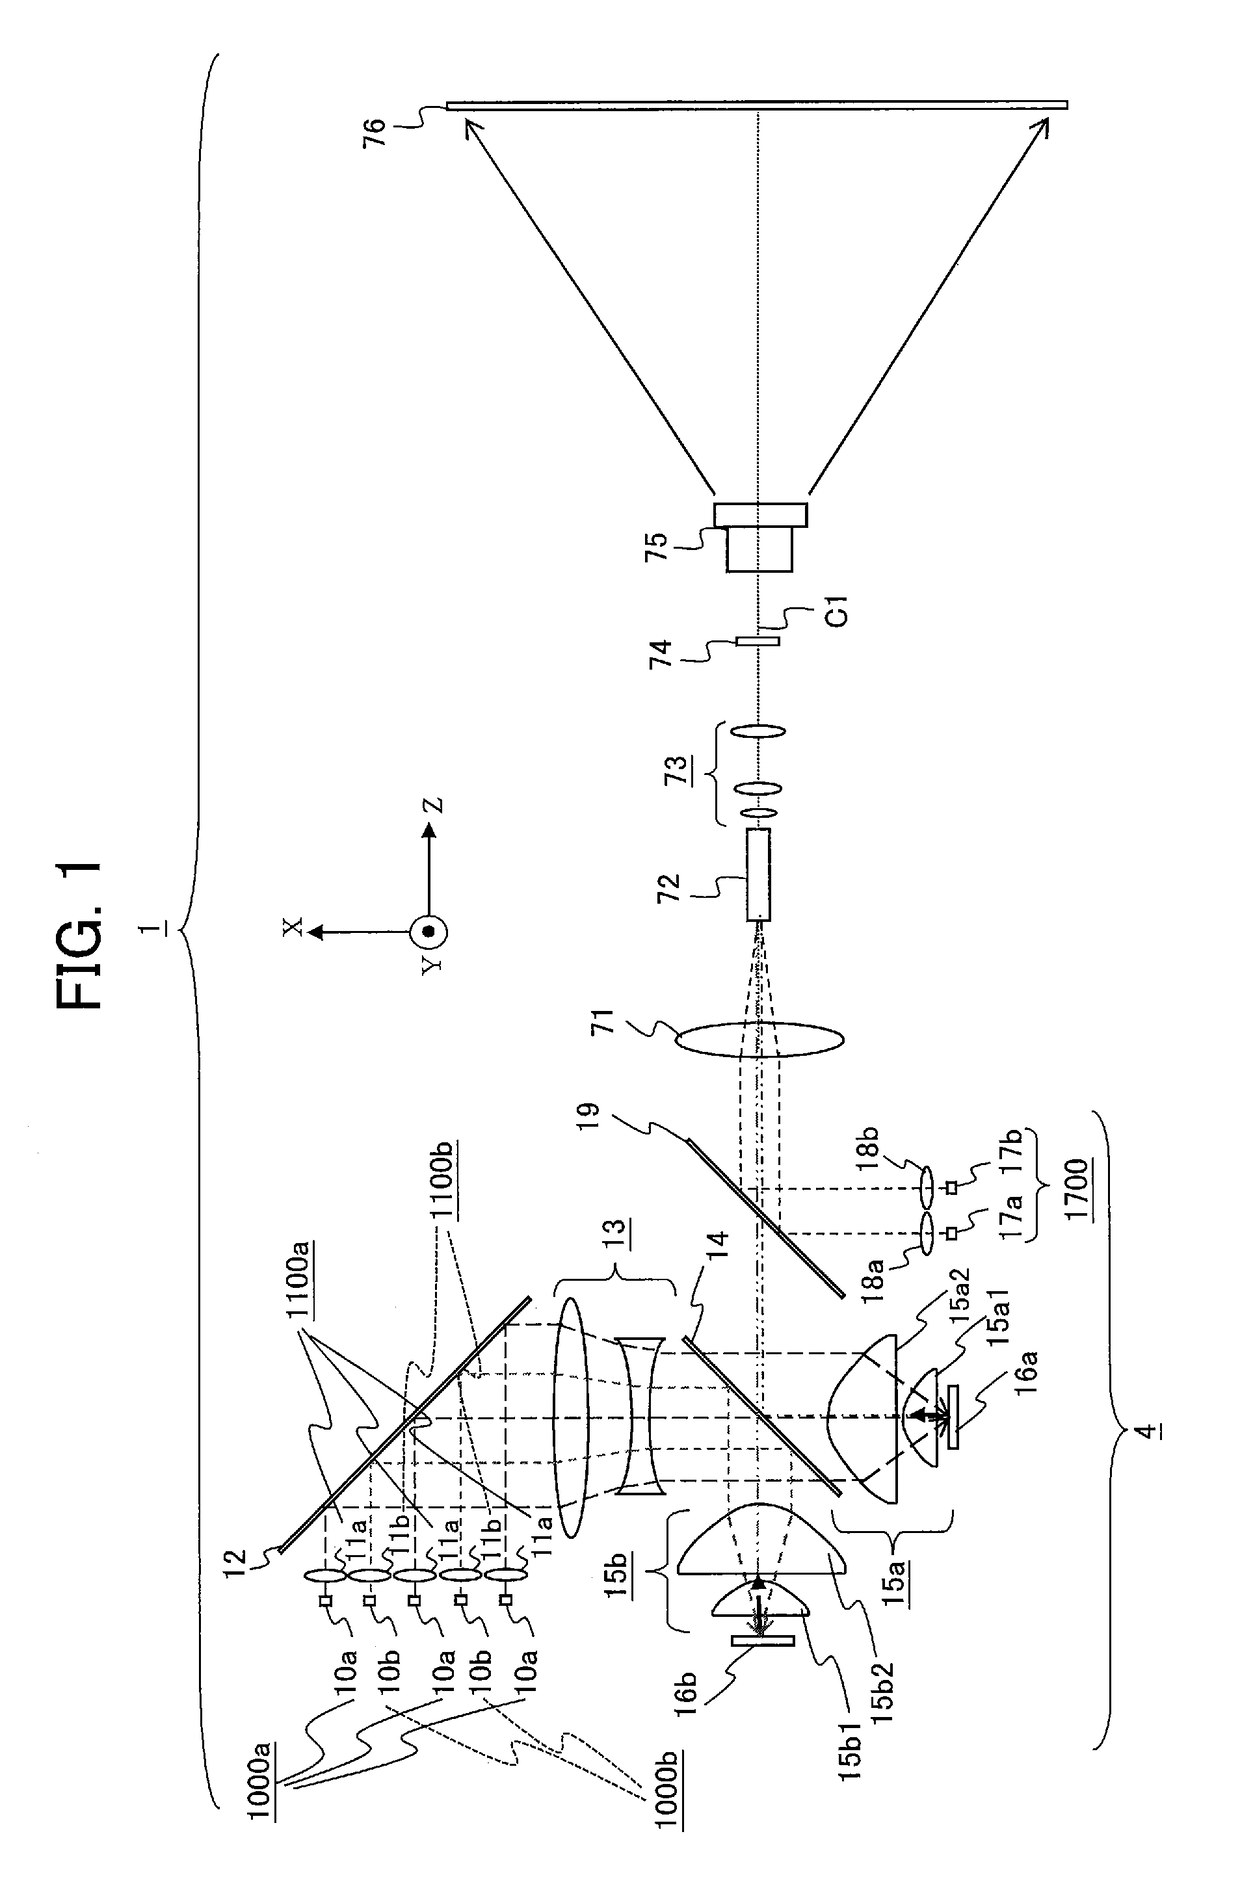 Light source device using monochromatic light to excite stationary phosphor layers